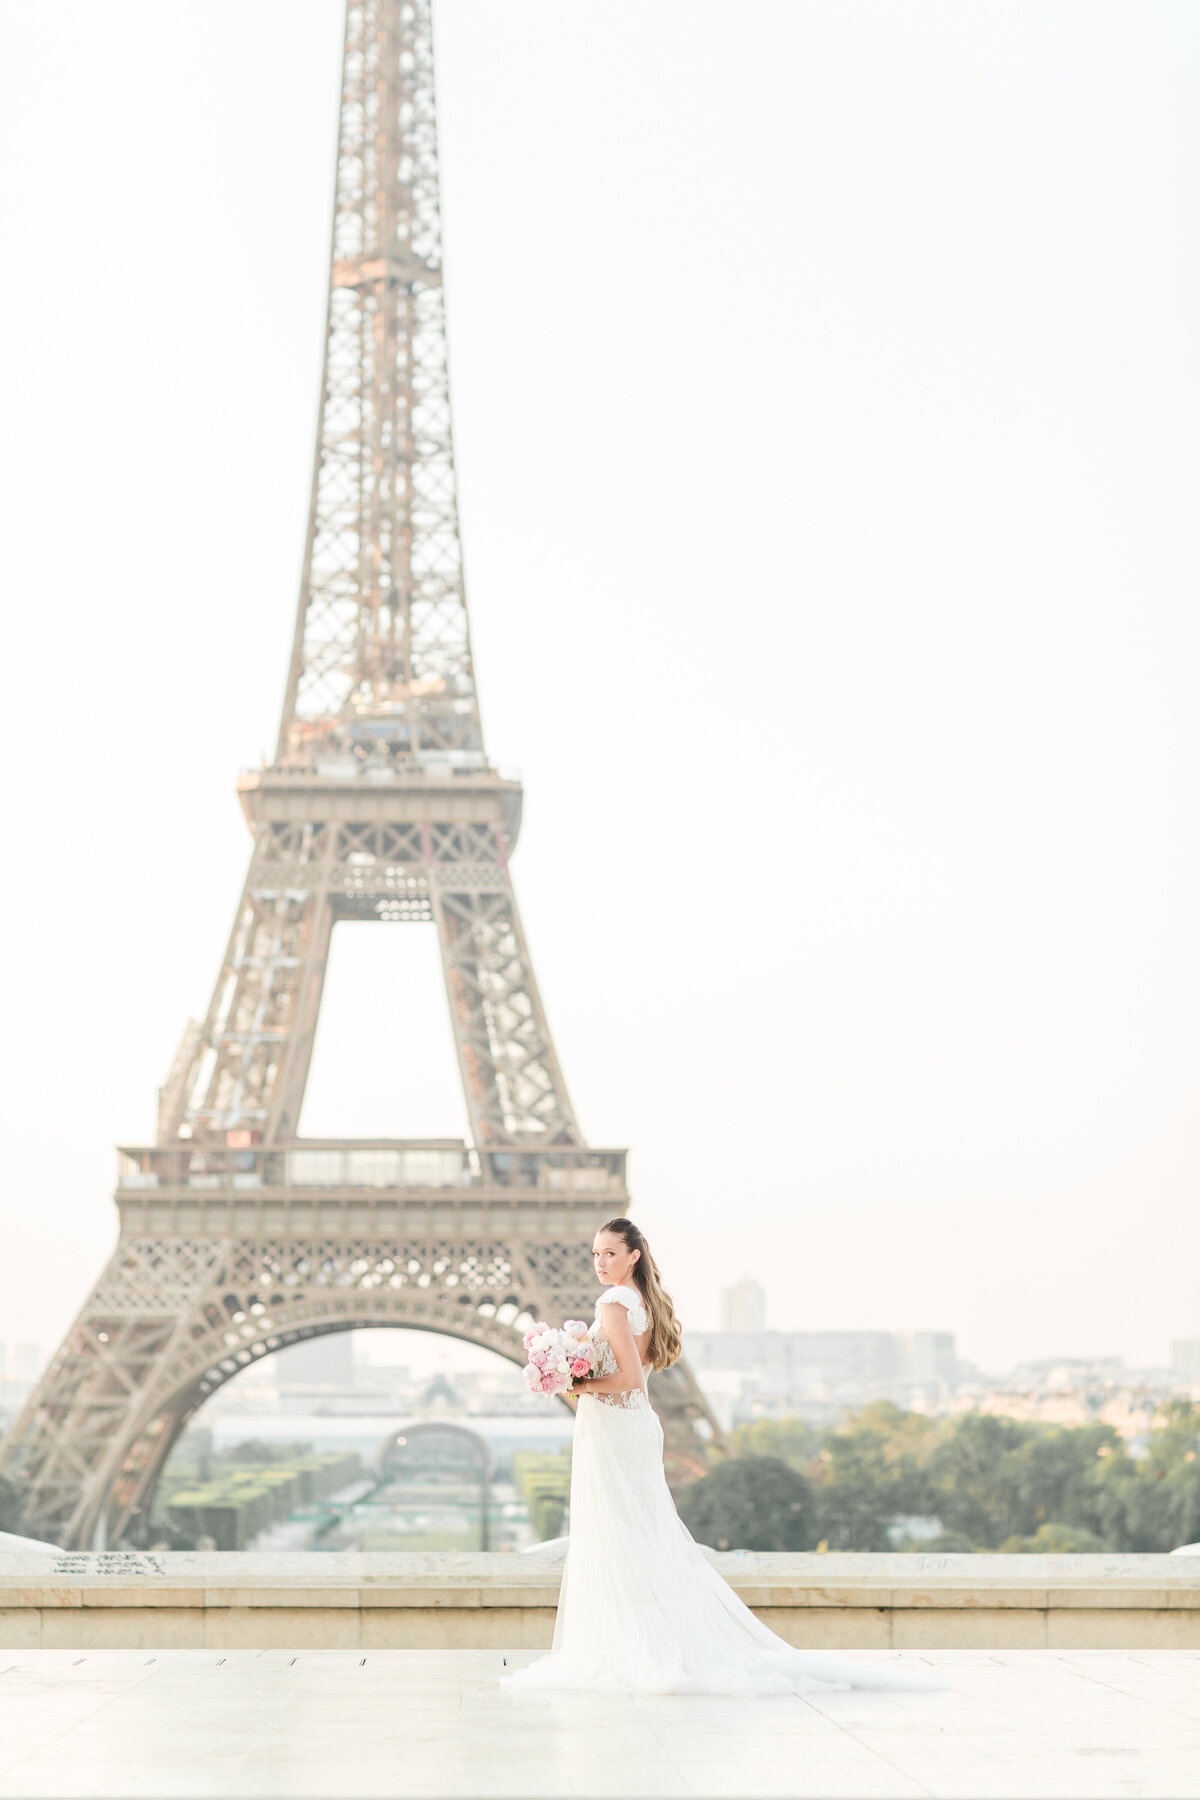 A bride is captured standing on a stone  staircase with the Eiffel Tower clear in the background. She is looking over her shoulder at the camera. Captured by US-based destination wedding photographer Lia Rose Weddings